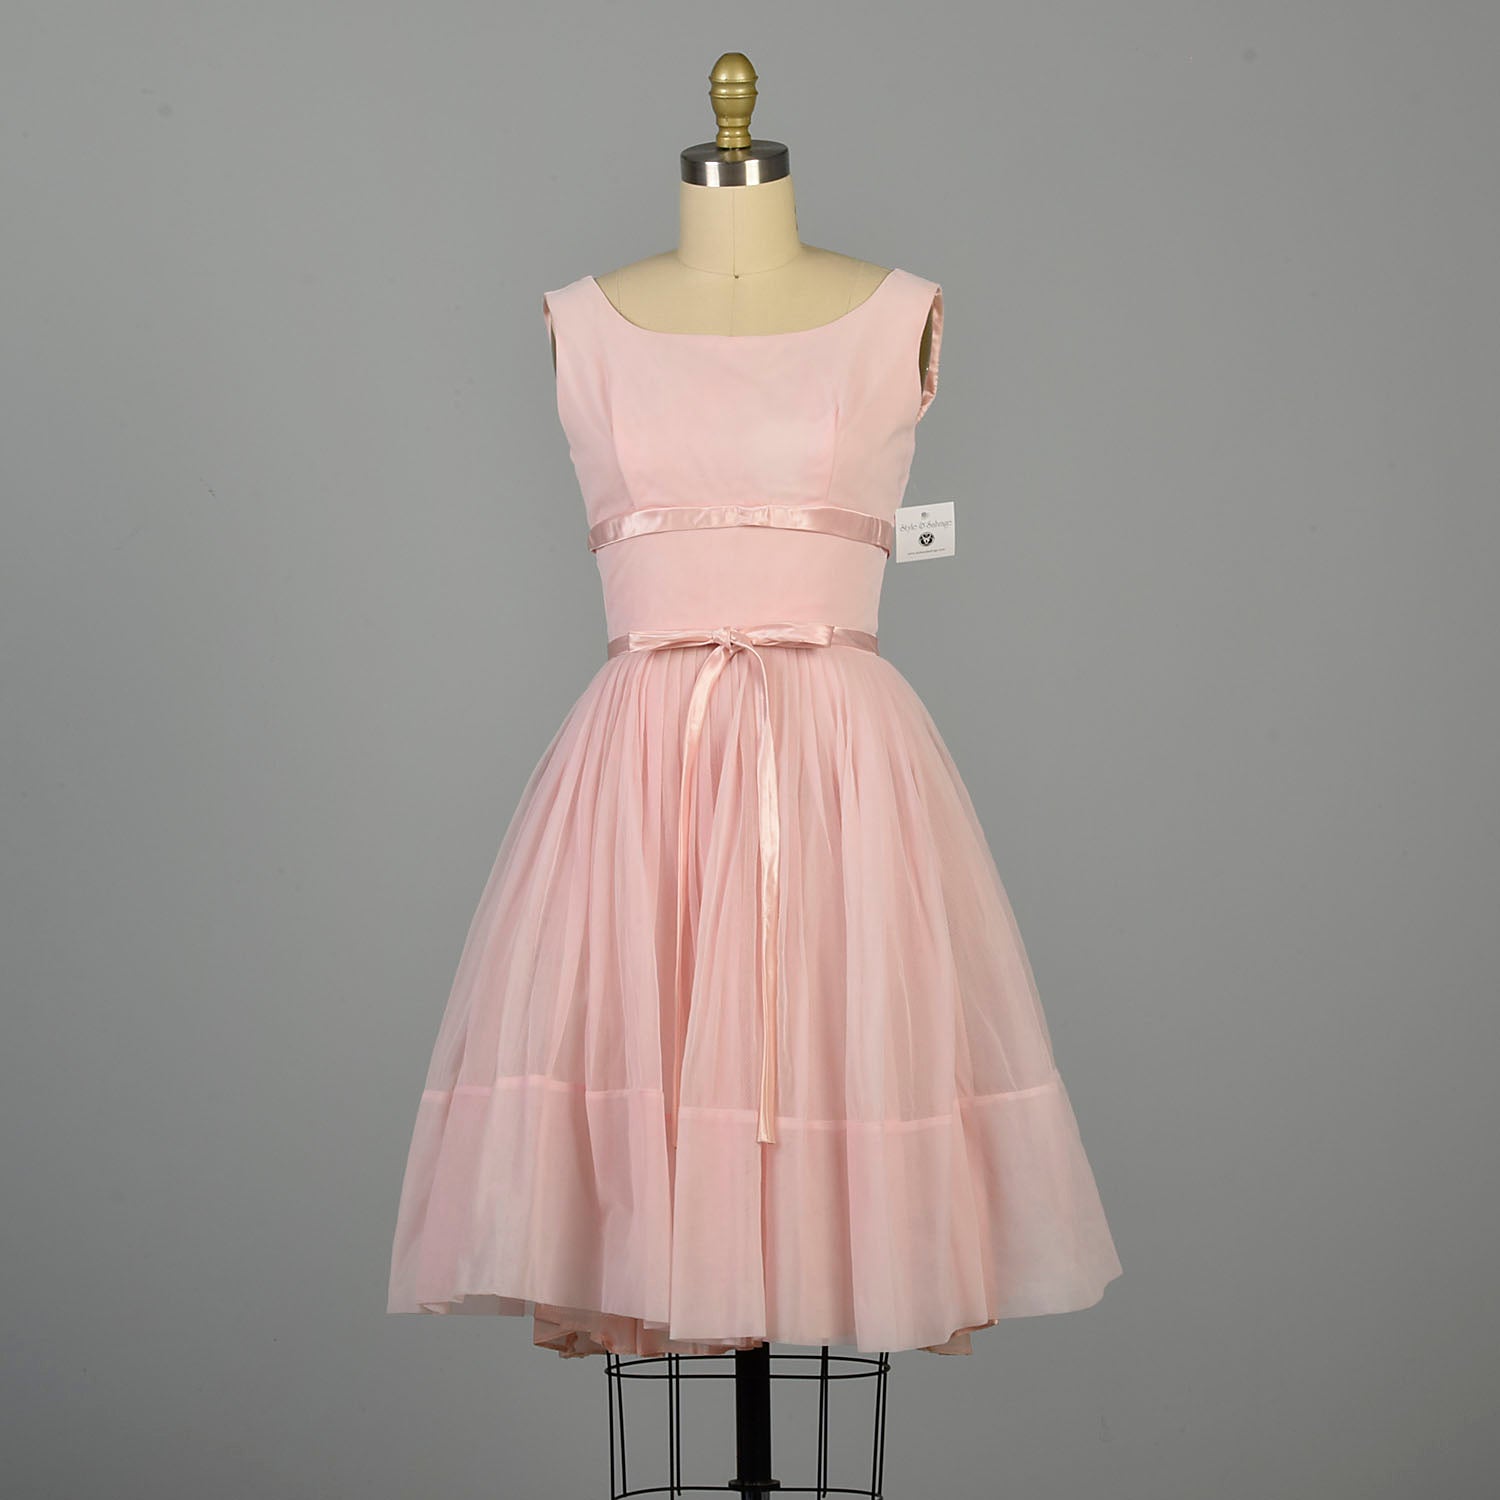 XXS 1950s Fit and Flare Dress Pink Sleeveless Barbie Party Dress